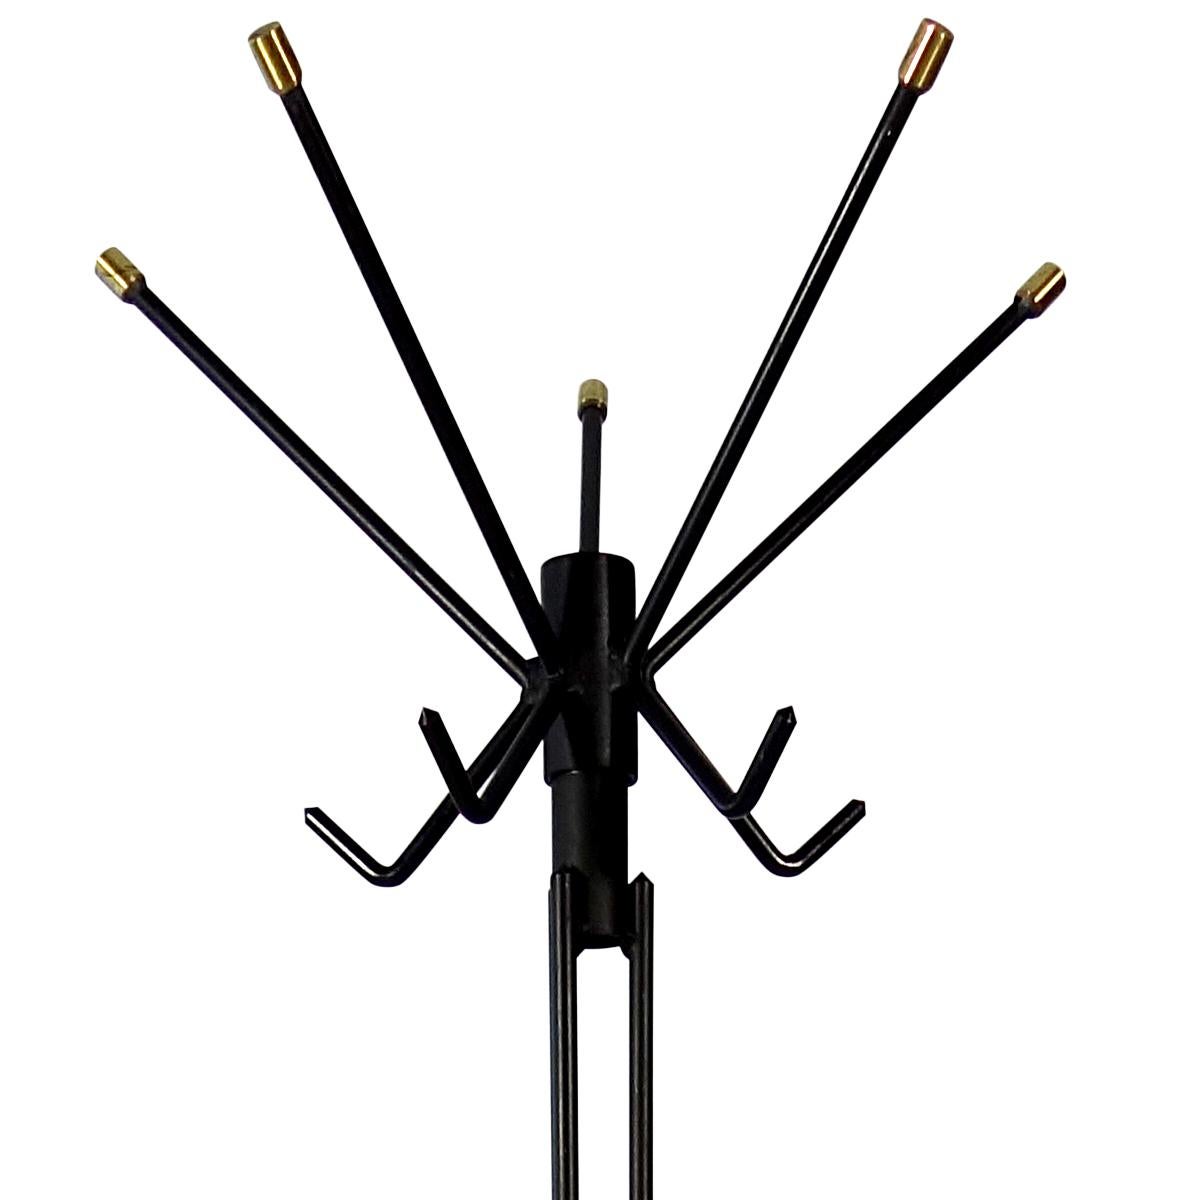 Very elegant and refined coat stand in the beloved Sputnik style which was very popular during the 1950s. The base is made of black powder coated steel. It has coat hangers on two levels providing easy access for children as well. The ends of the